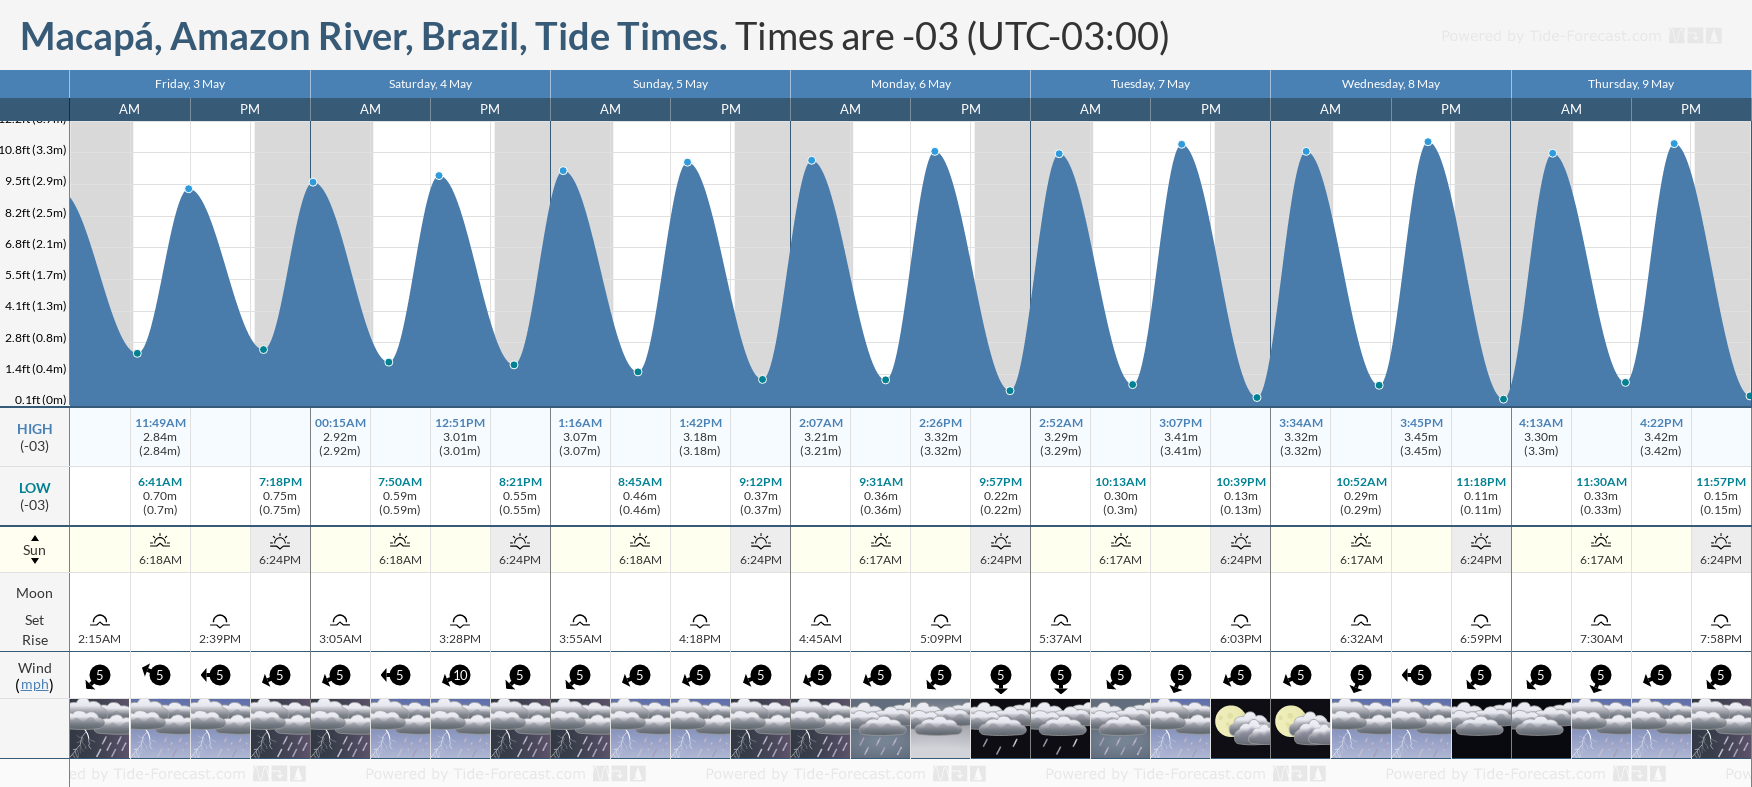 Macapá, Amazon River, Brazil Tide Chart including high and low tide tide times for the next 7 days